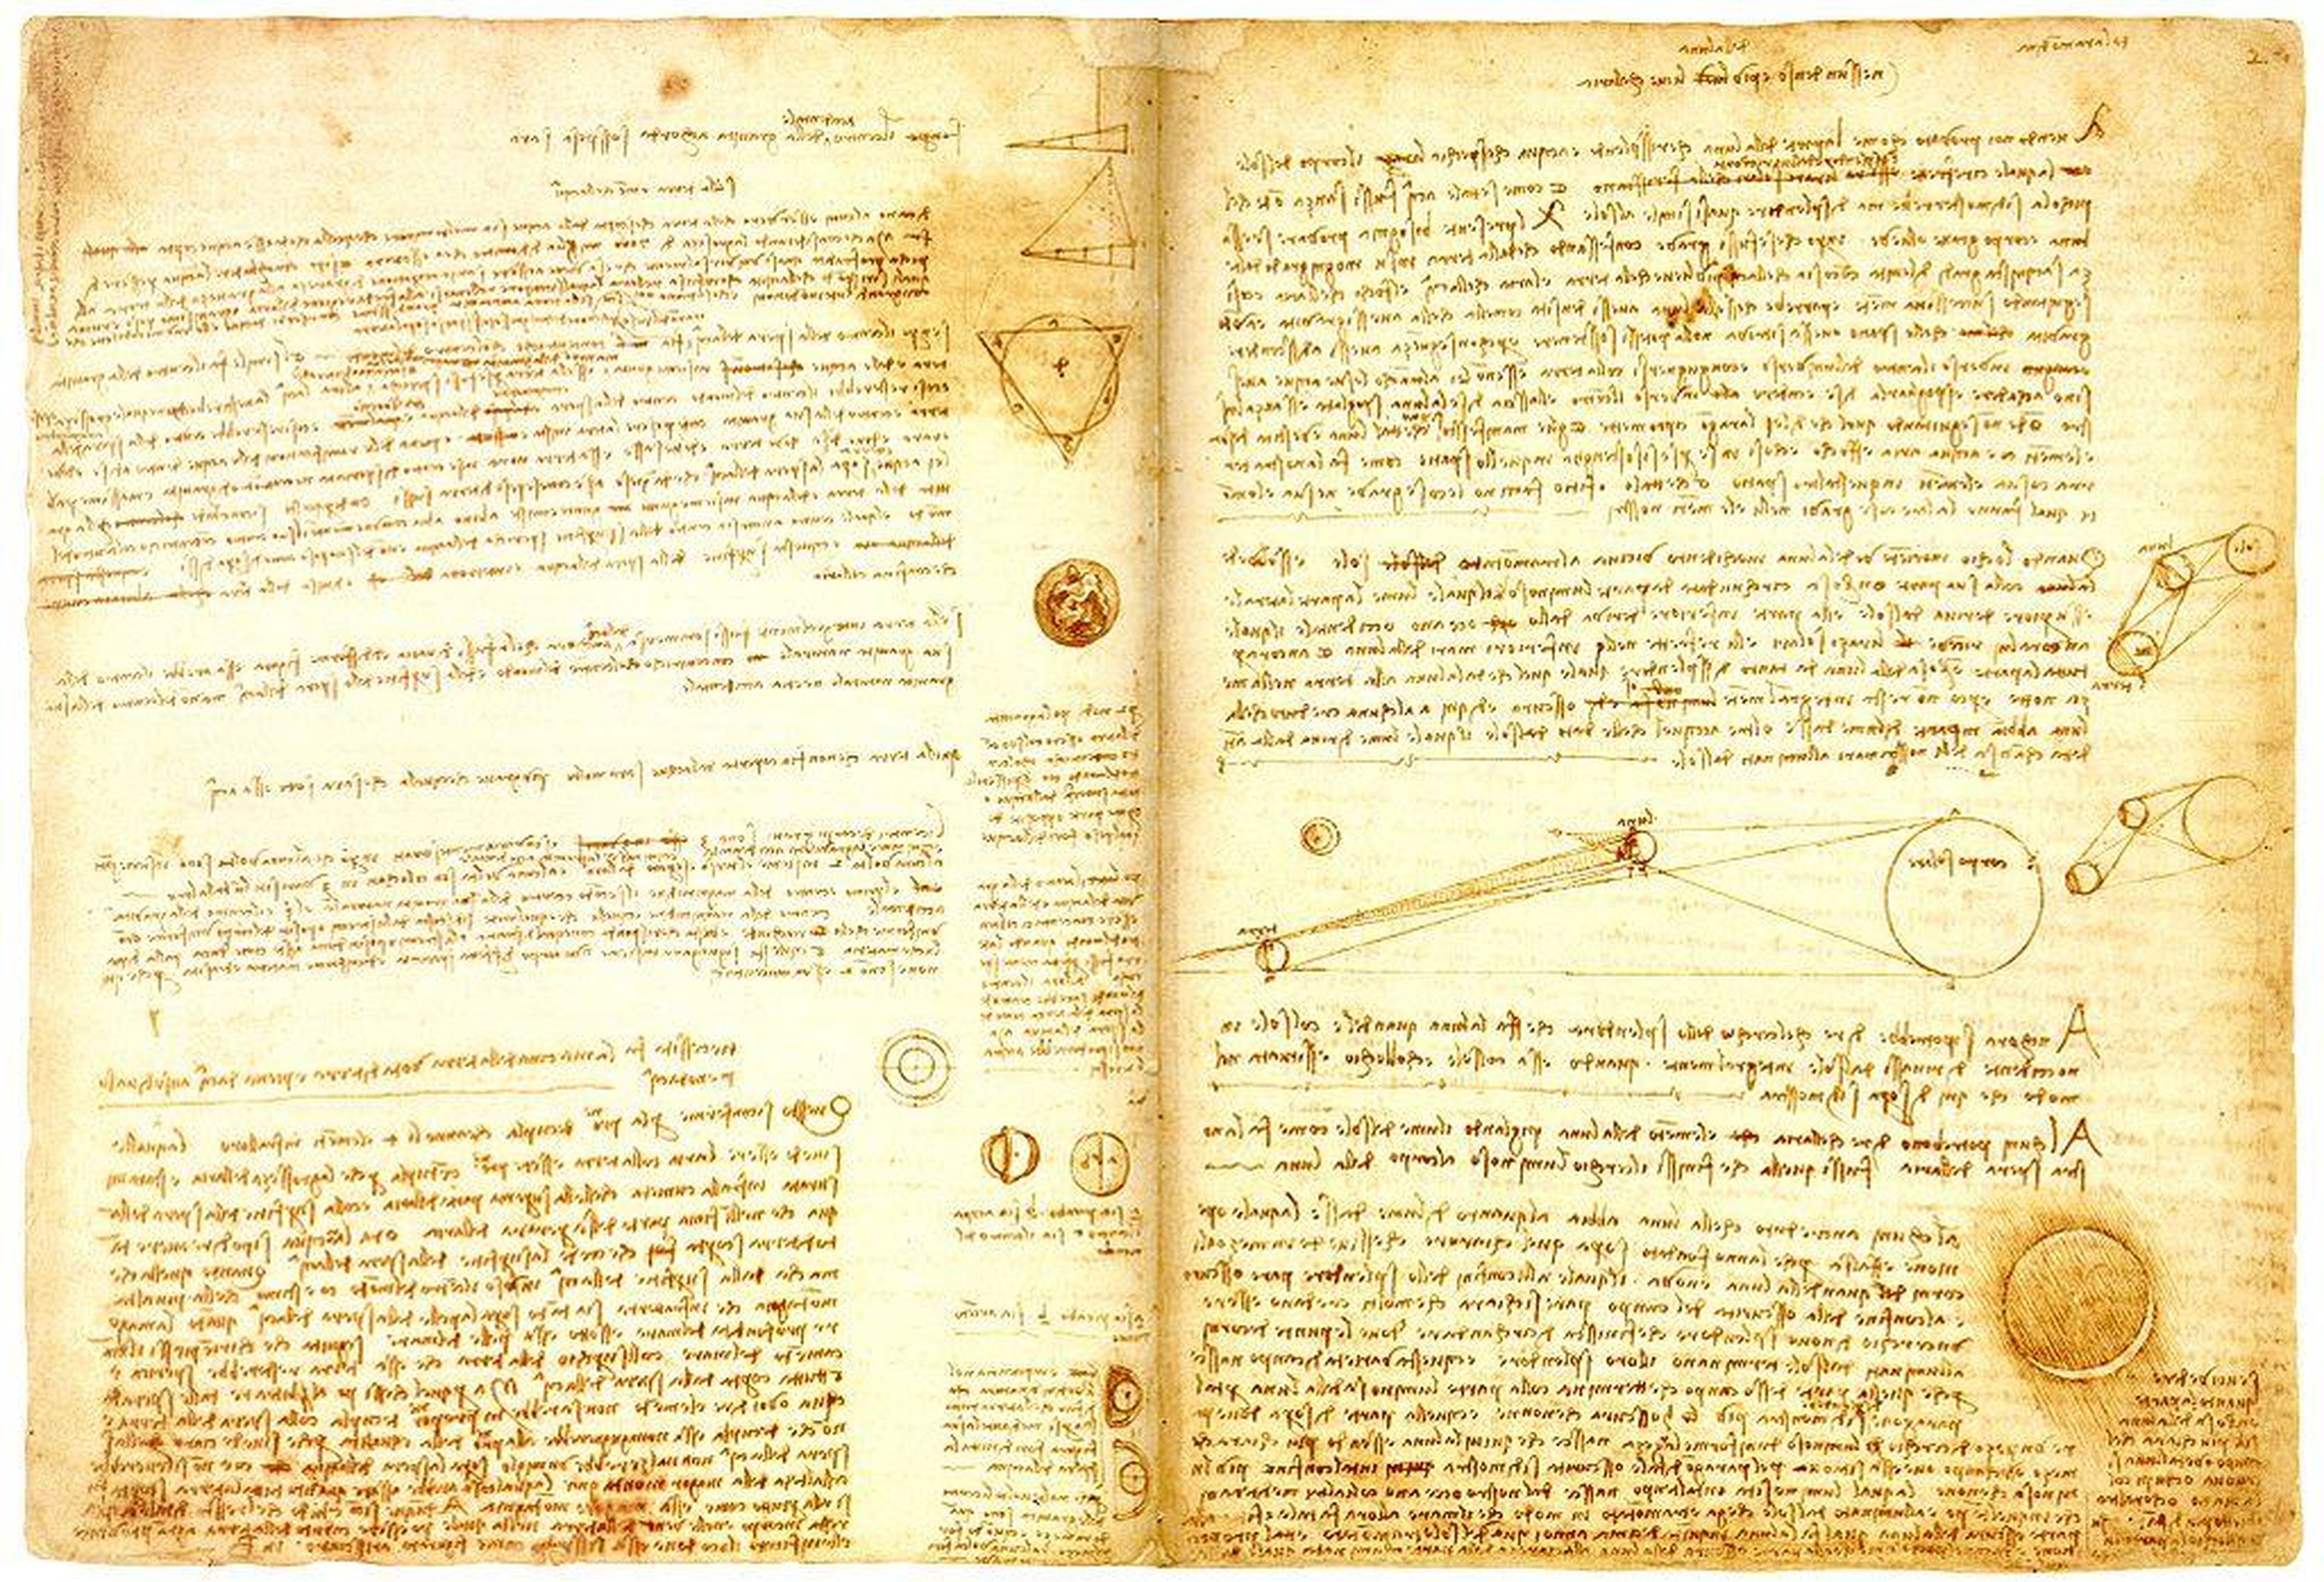 10. Besides his plane, one of Gates' biggest splurges was the Codex Leicester, a collection of writings by Leonardo da Vinci. He acquired it at a 1994 auction for $30.8 million.